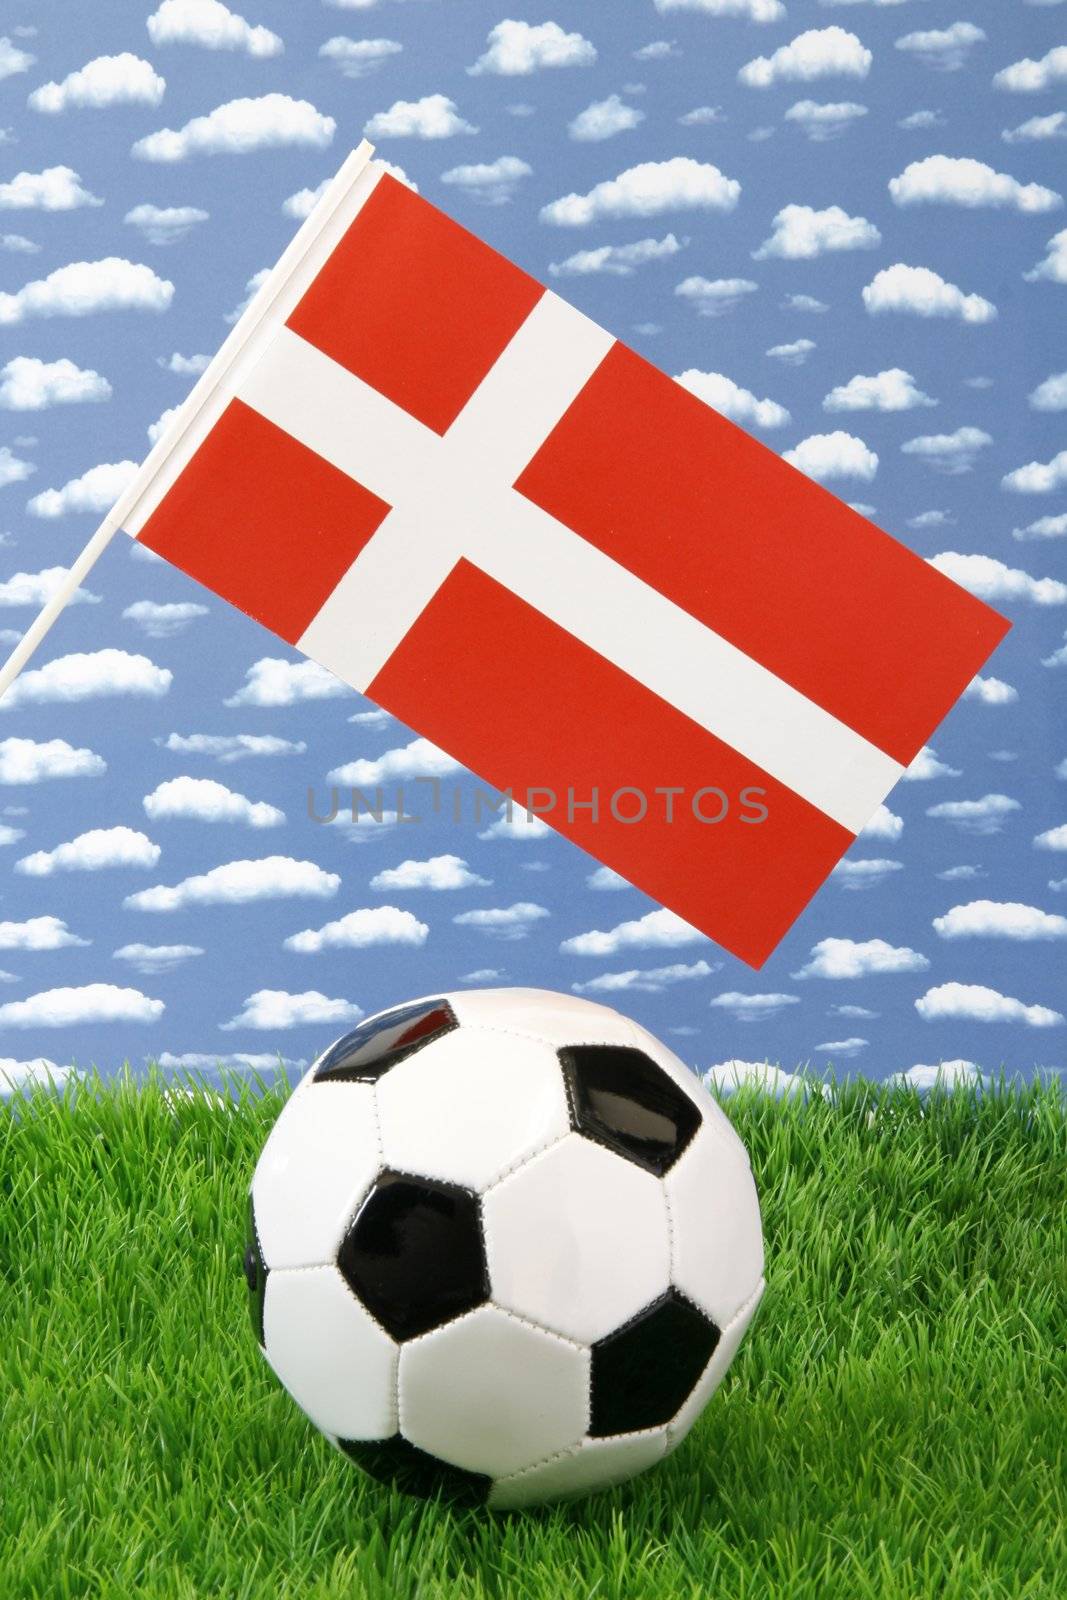 Soccerball on grass with danish national flag over sky background